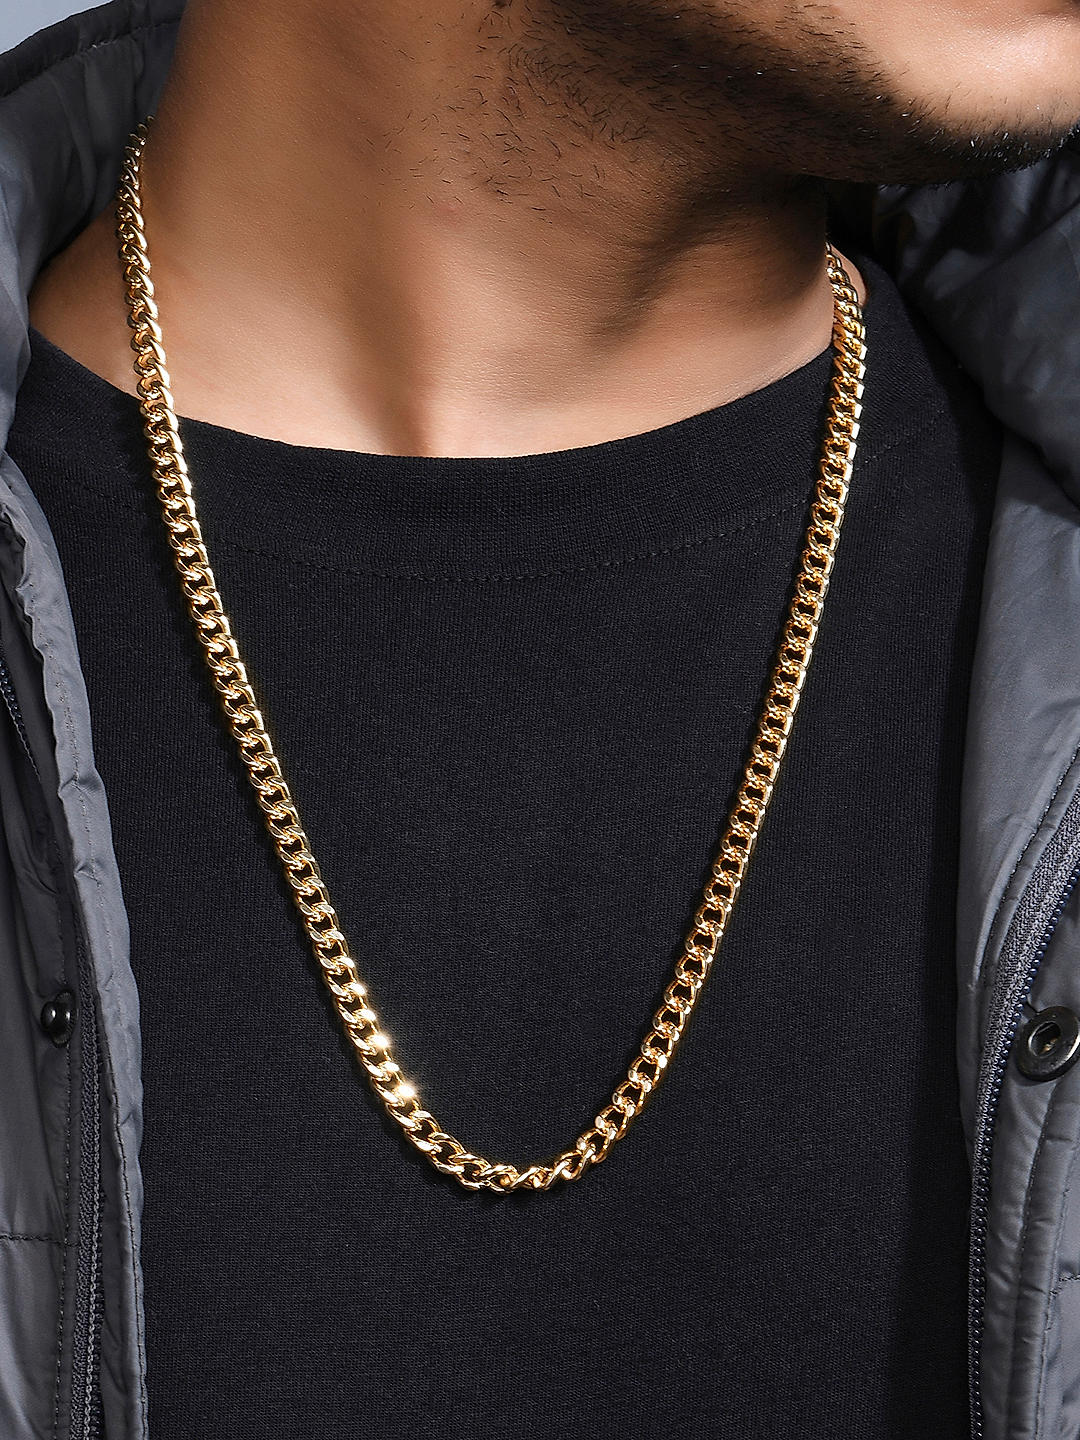 Gold Plated Necklace Long Link | Juulry.com